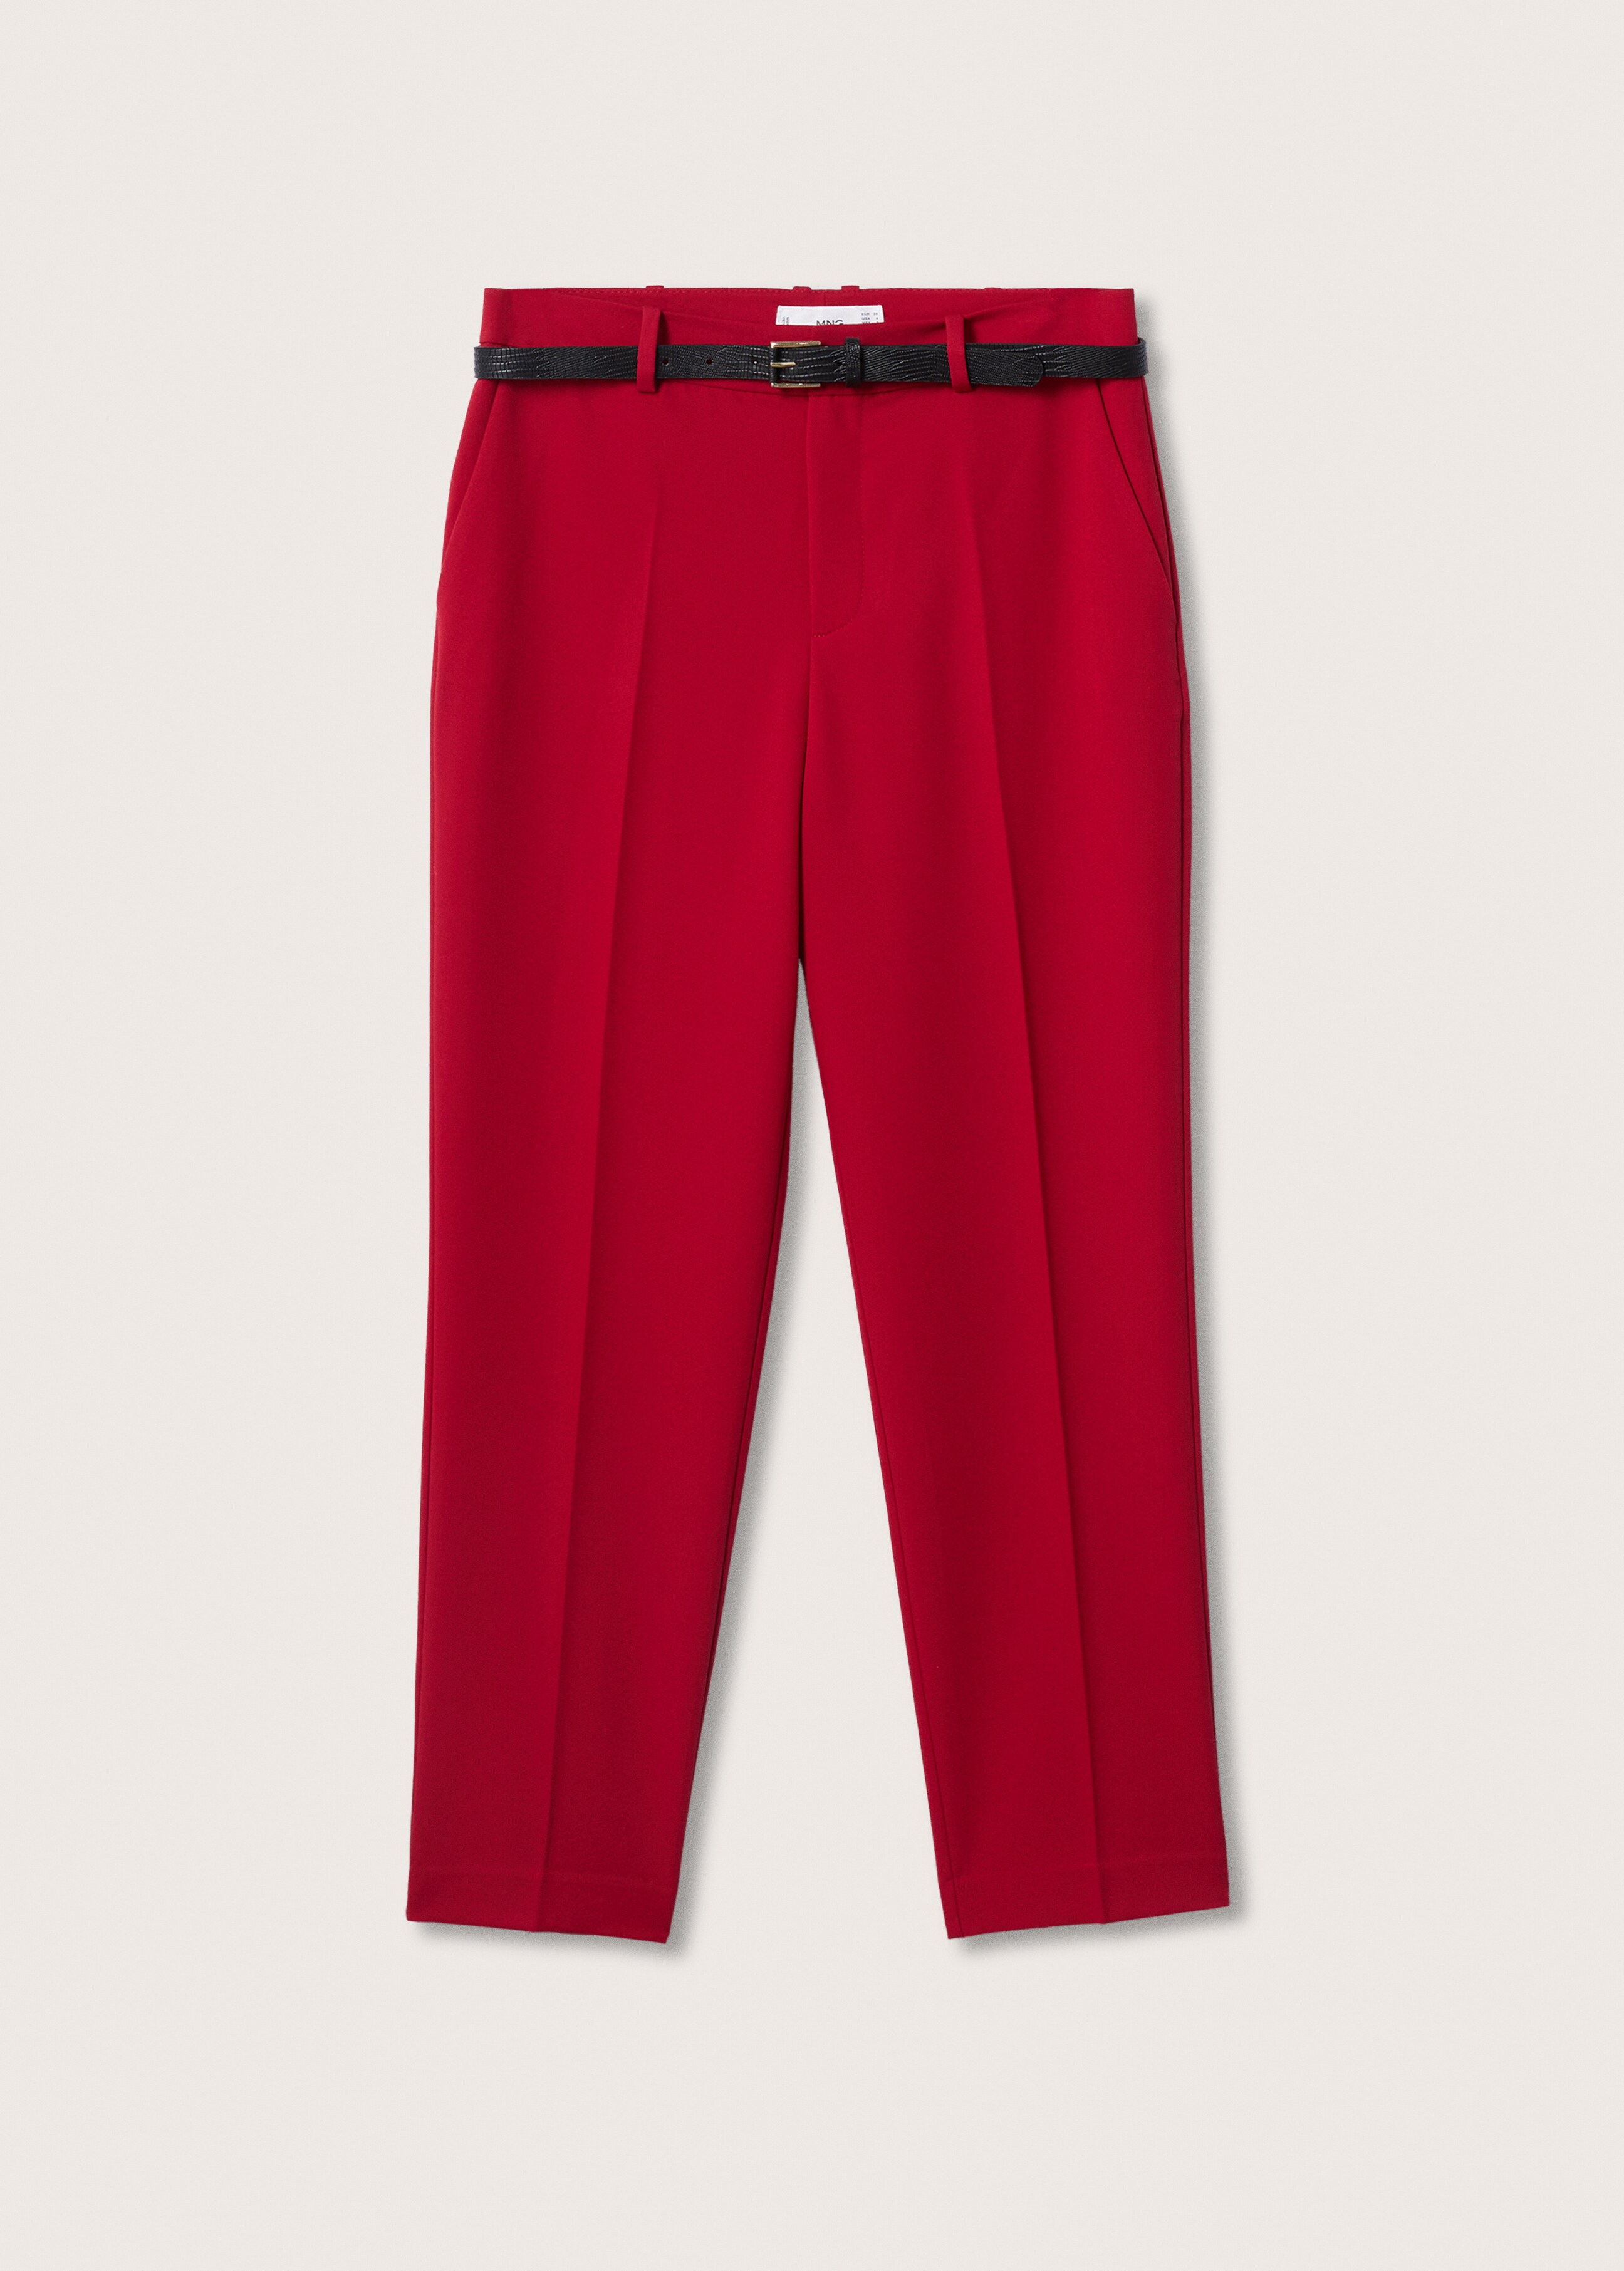 Belt suit trousers - Article without model